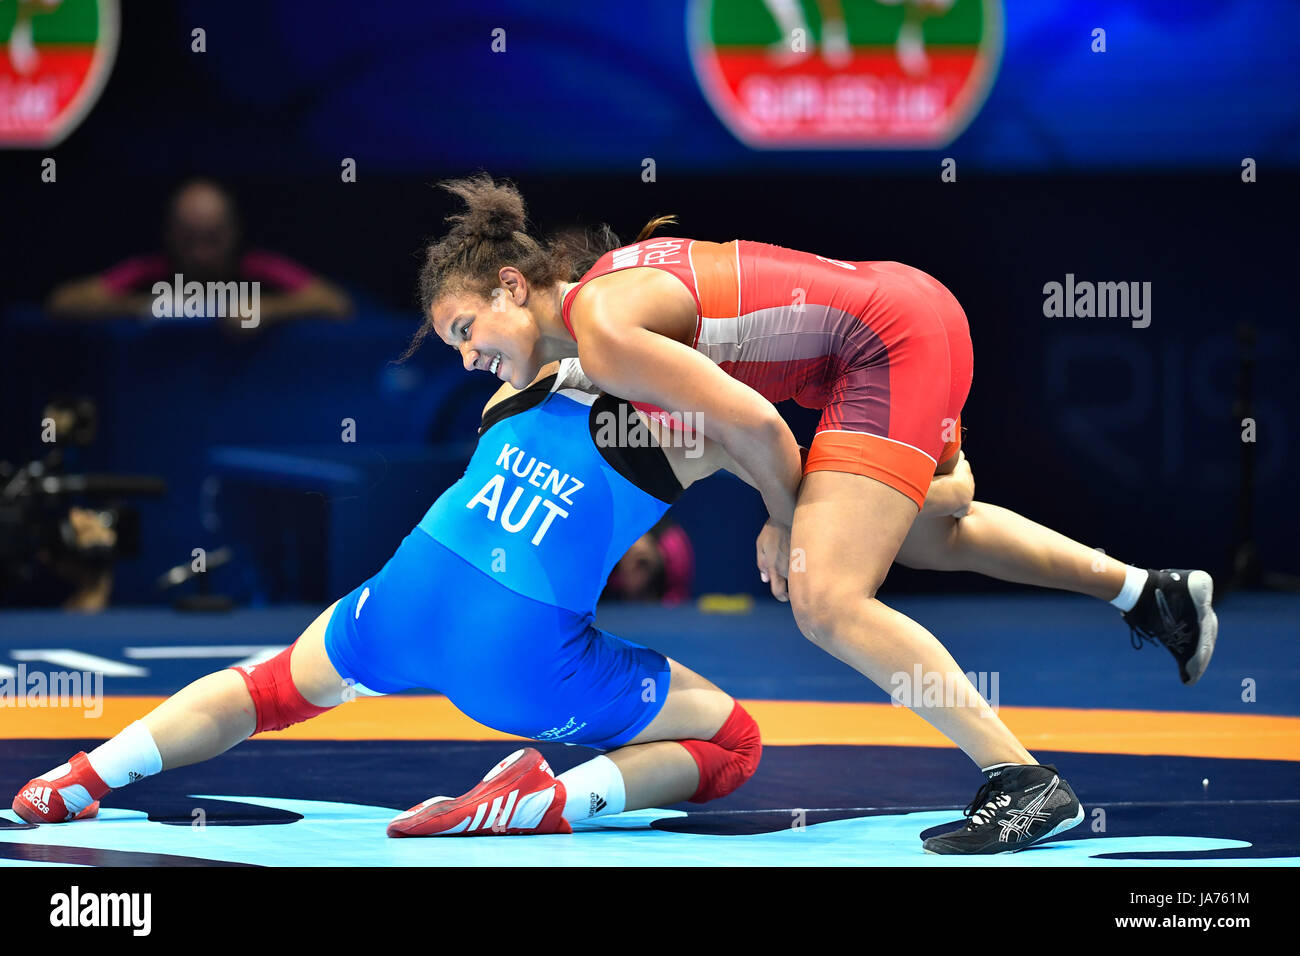 170825) -- PARIS, Aug. 25, 2017 (Xinhua) -- Koumba Selene Fanta Larroque  (R) of France competes with Martina Kuenz of Austria during the match of  bronze of women's 69kg wrestling of the